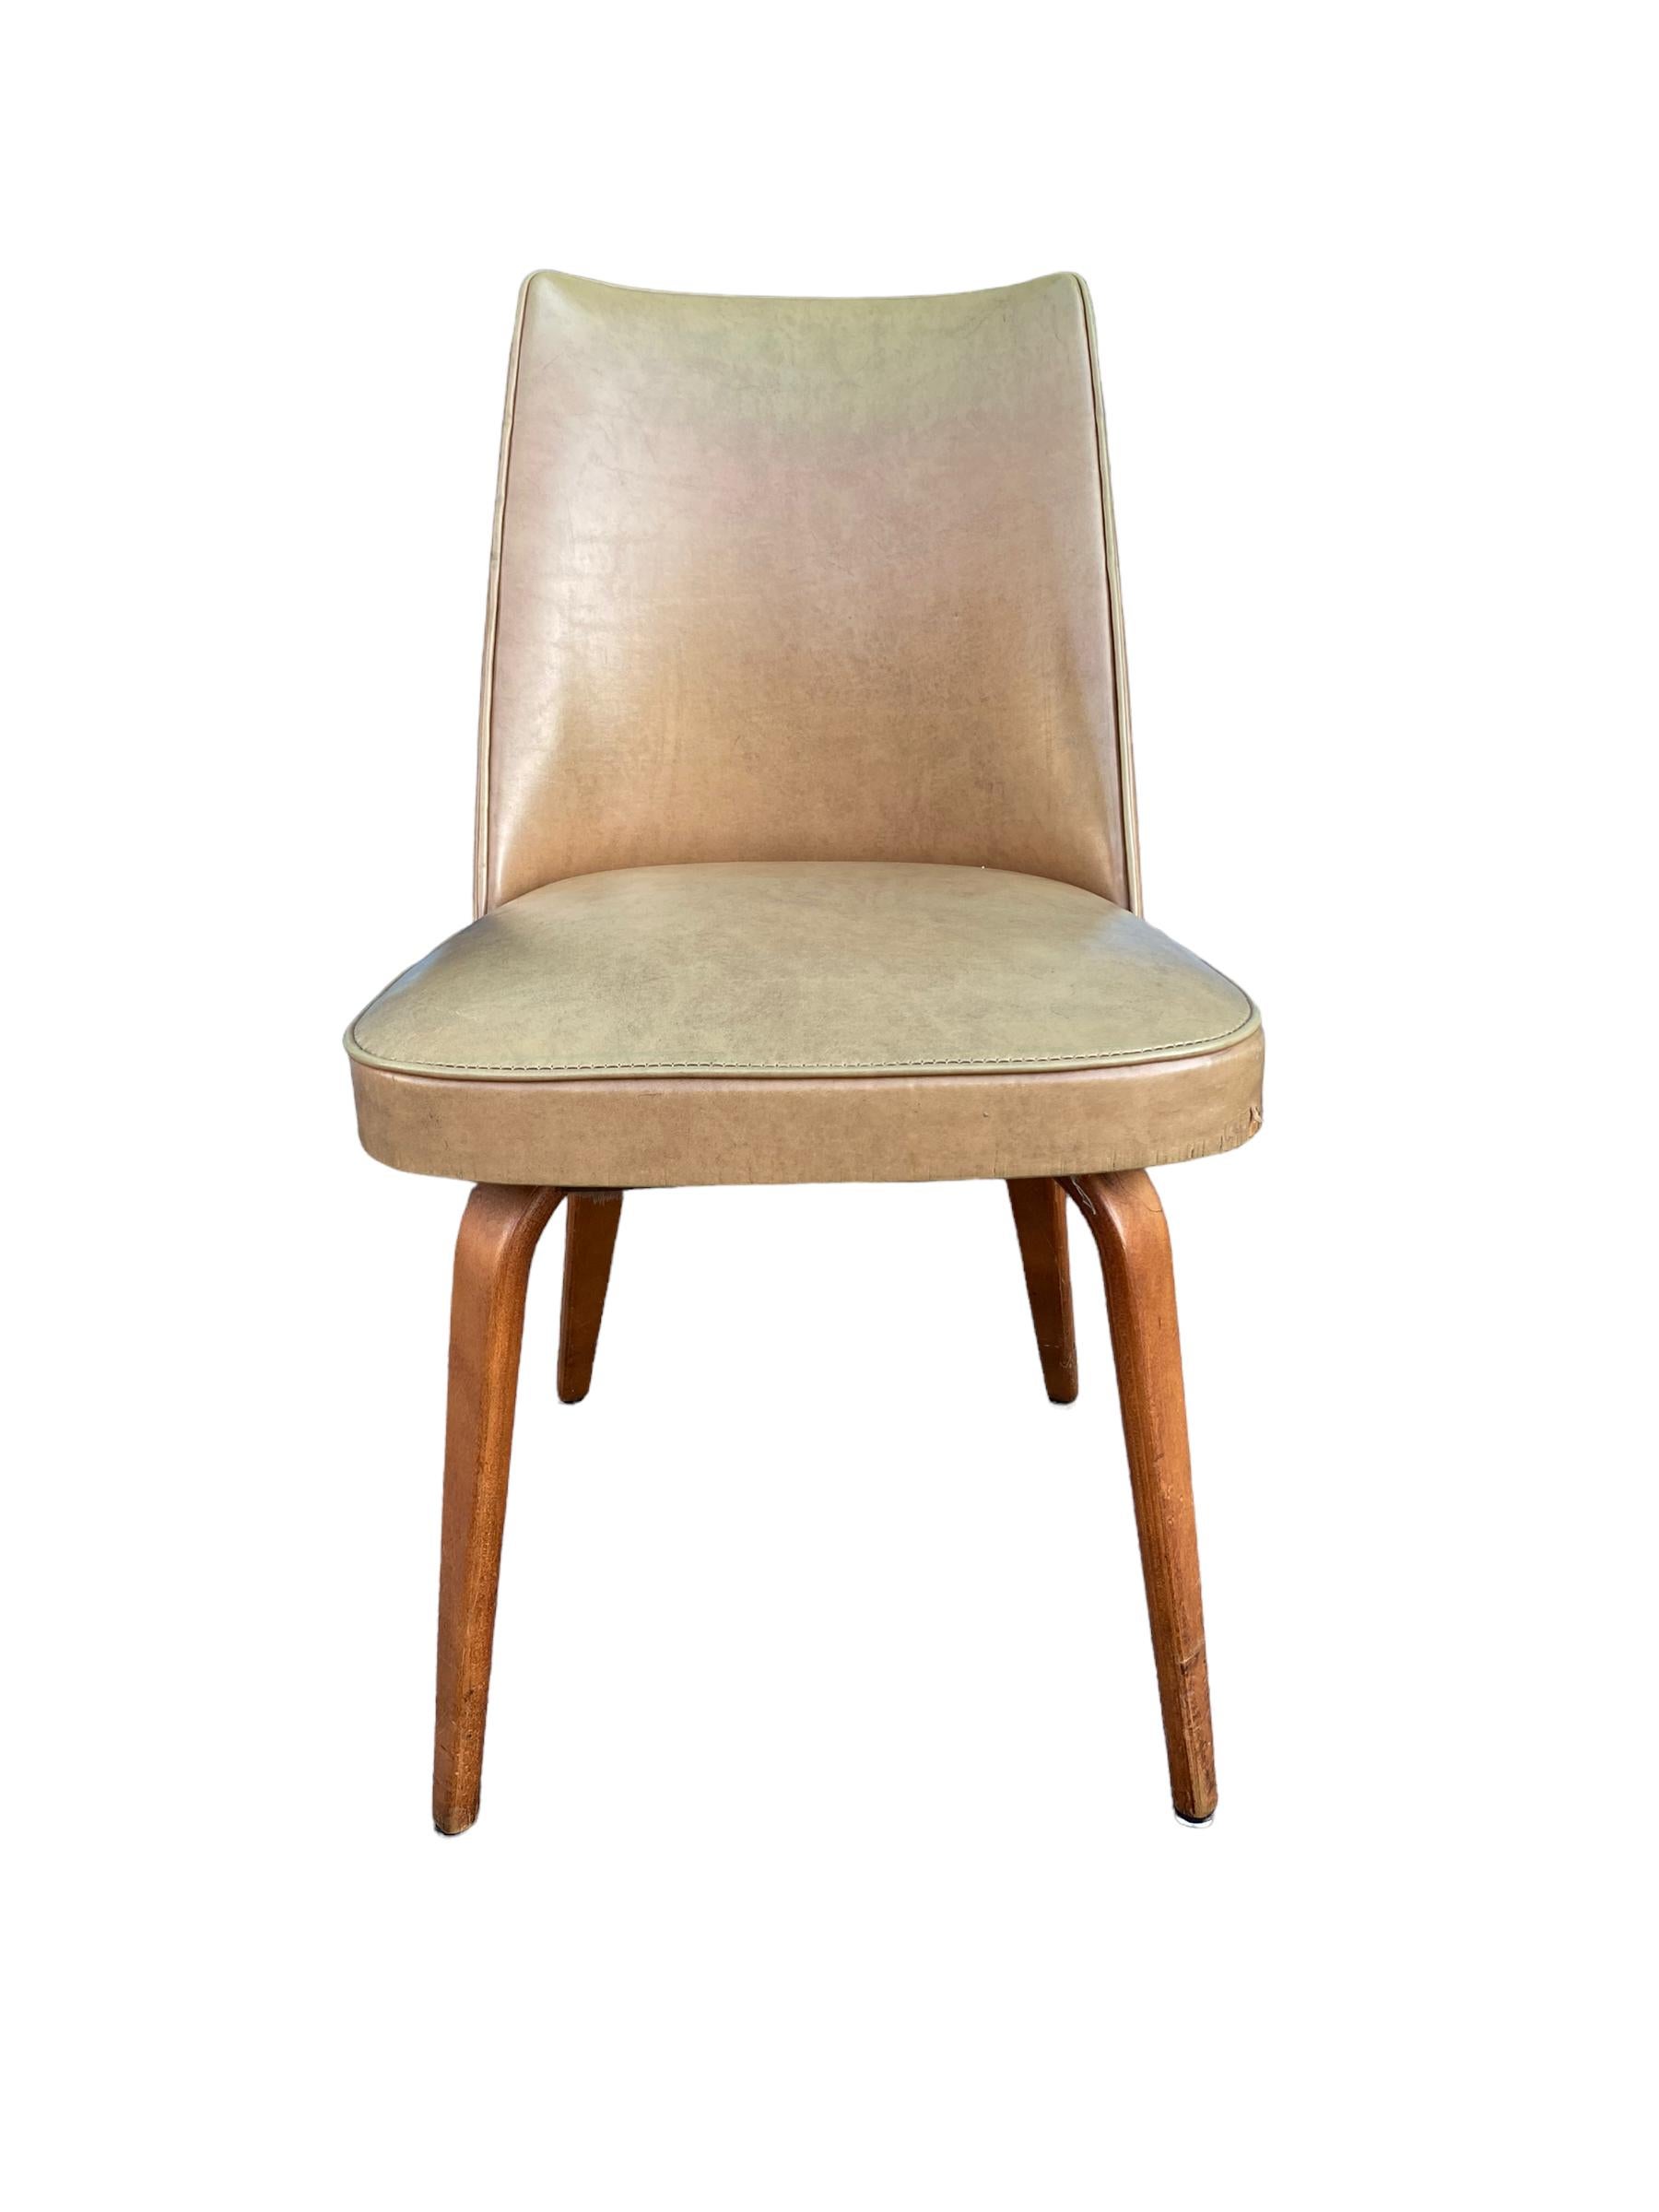 Elegant dining chair by Thonet featuring bentwood legs and cream leather upholstery